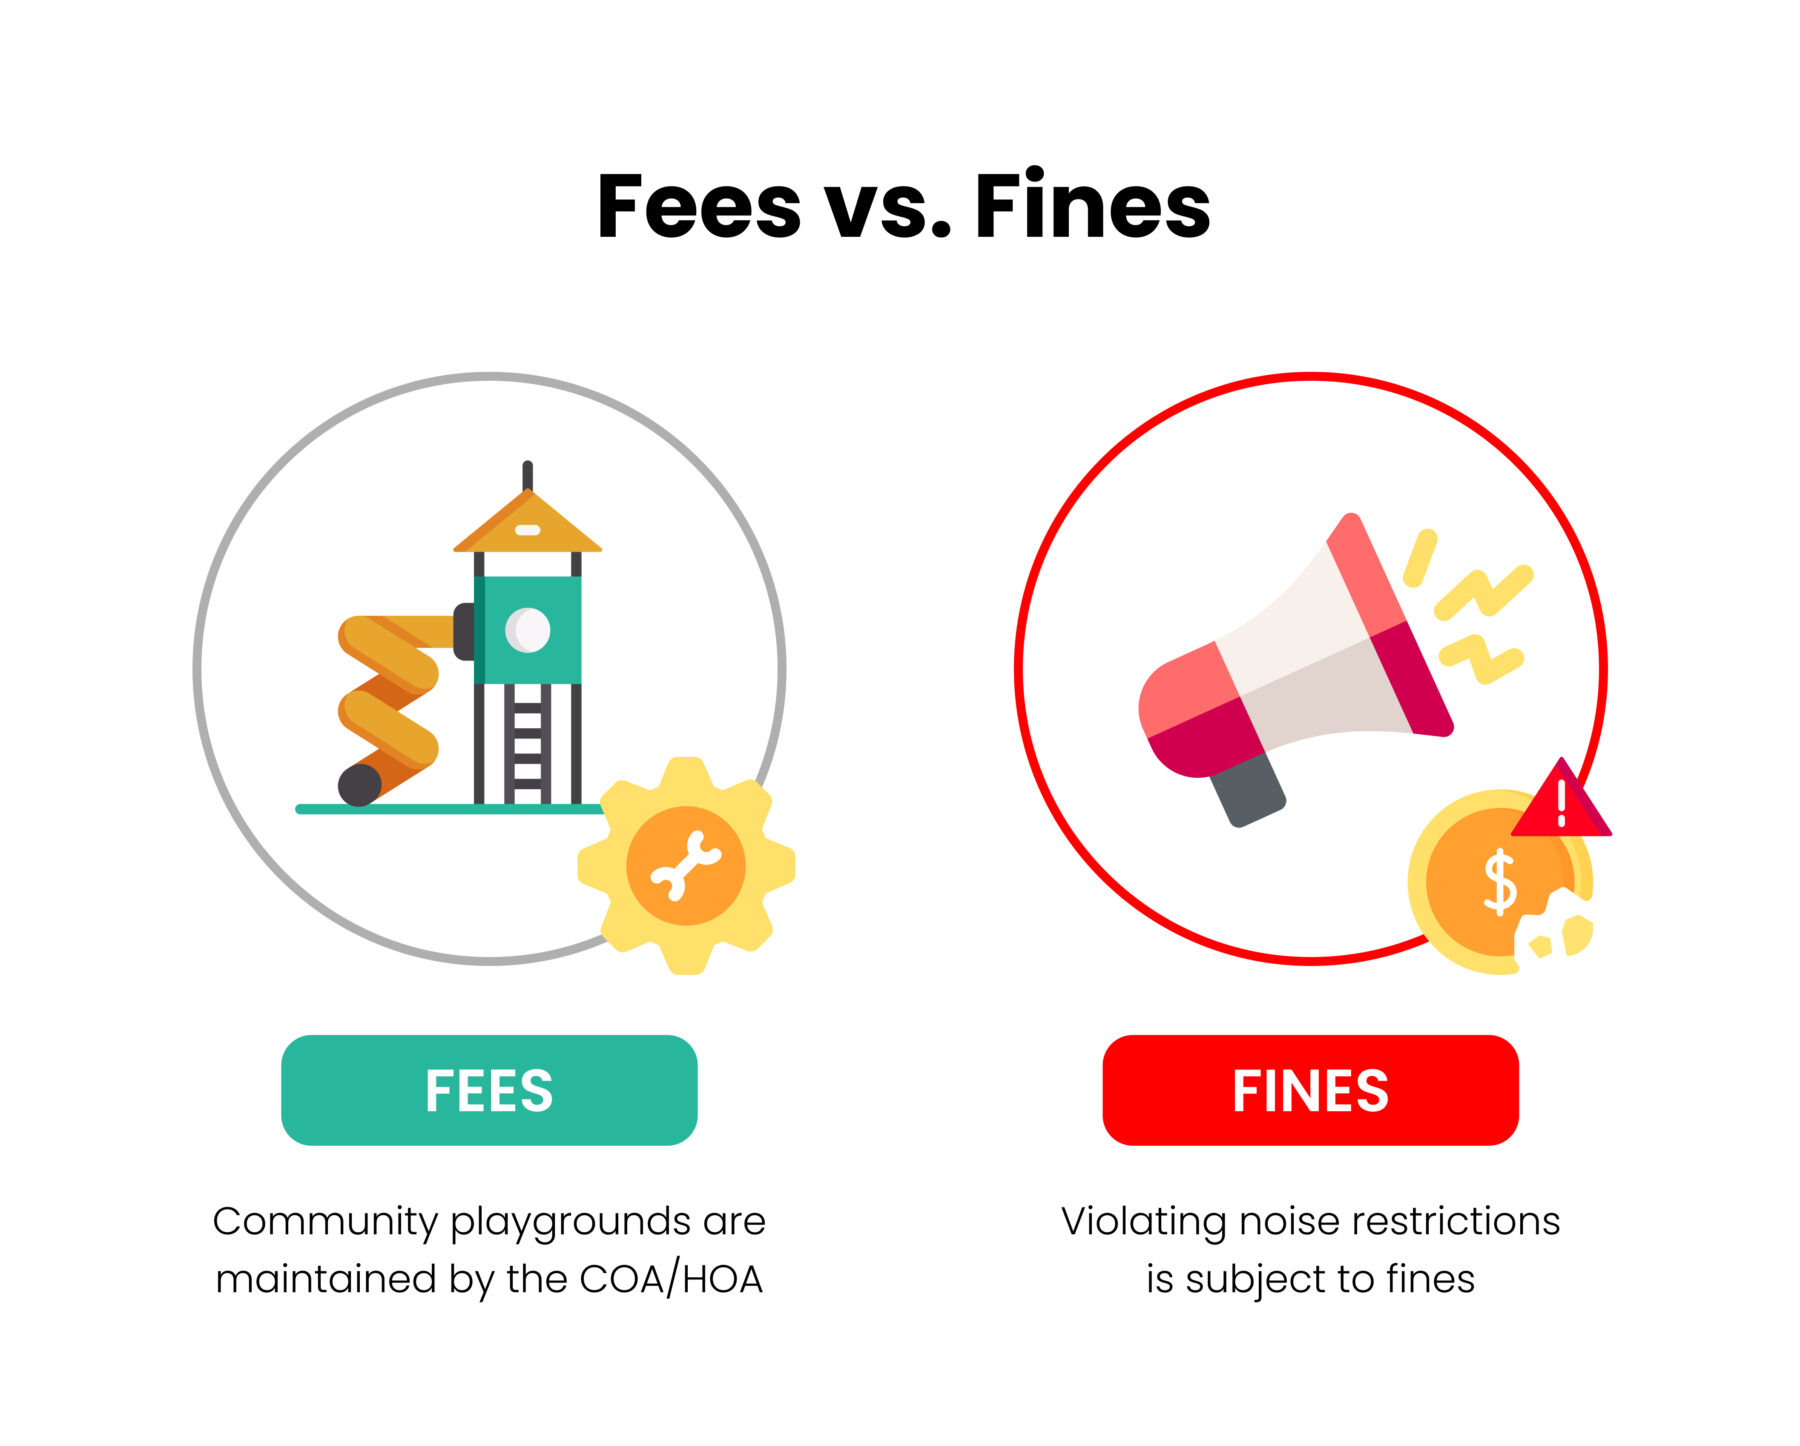 infographic fees vs fines comparisong between COAs and HOAs